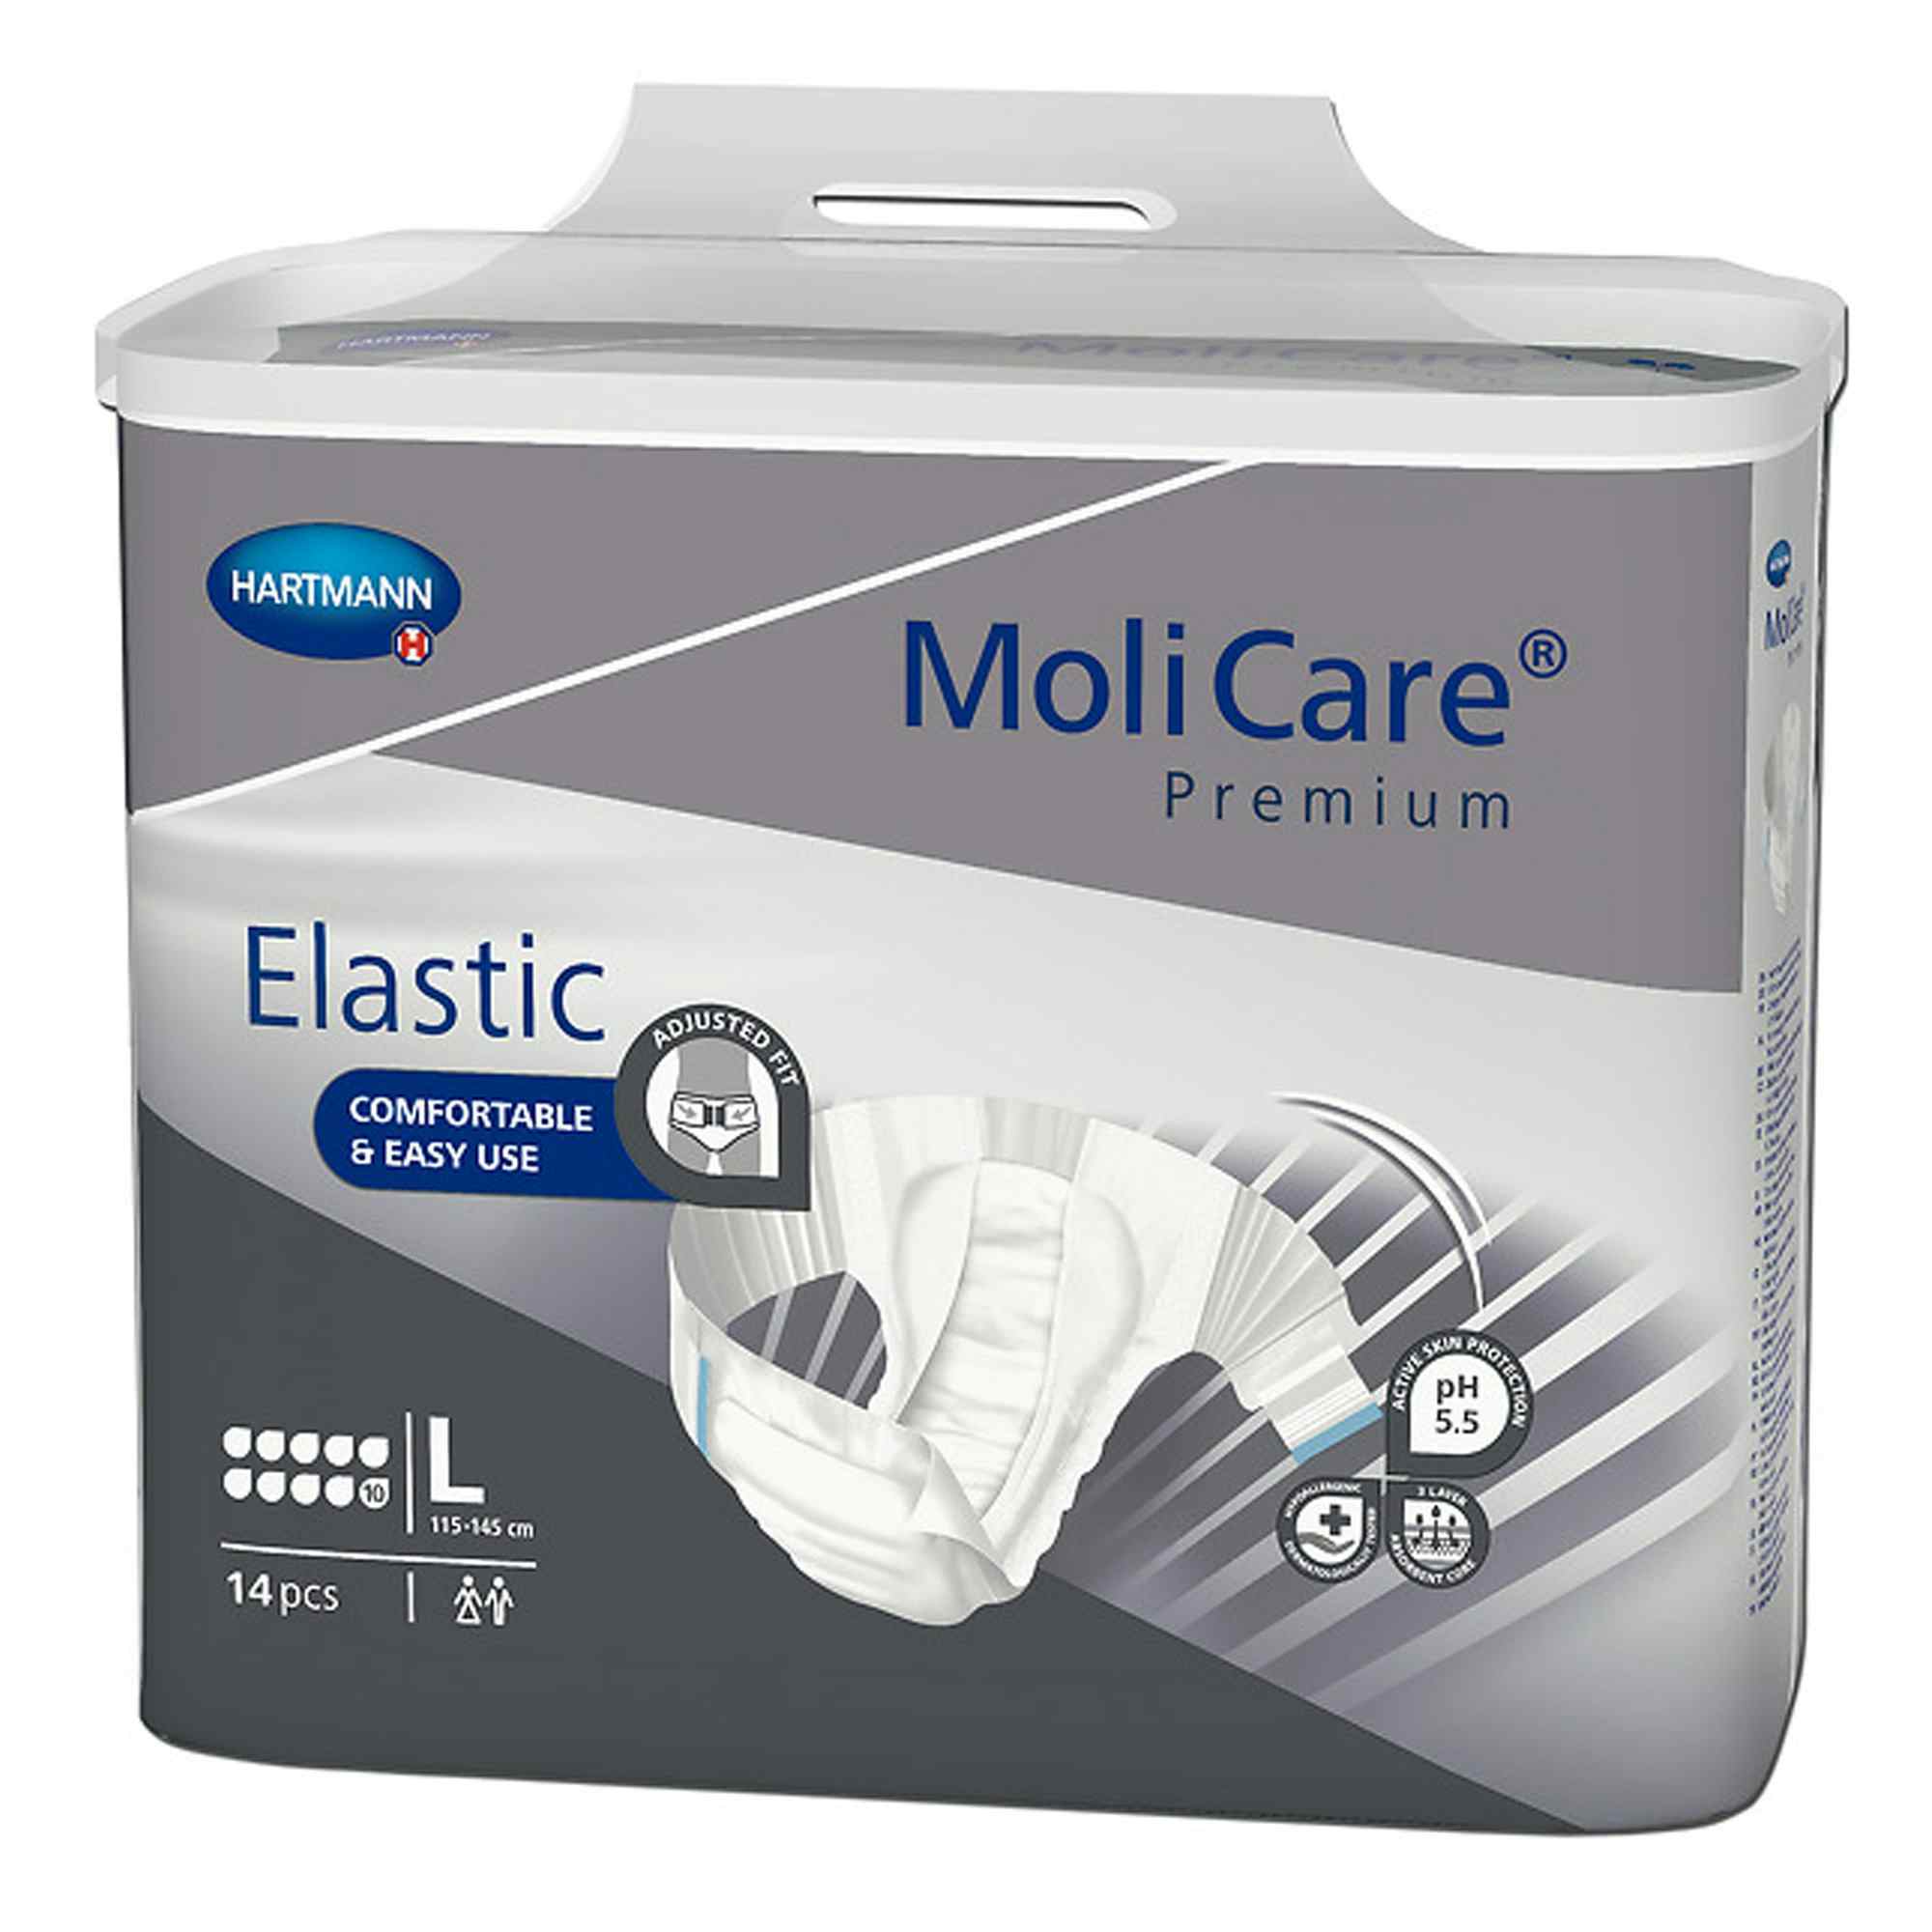 MoliCare Premium 10D Disposable Brief Adult Diapers with Tabs, Heavy Absorbency, 165673, Large (45-57") - Case of 56